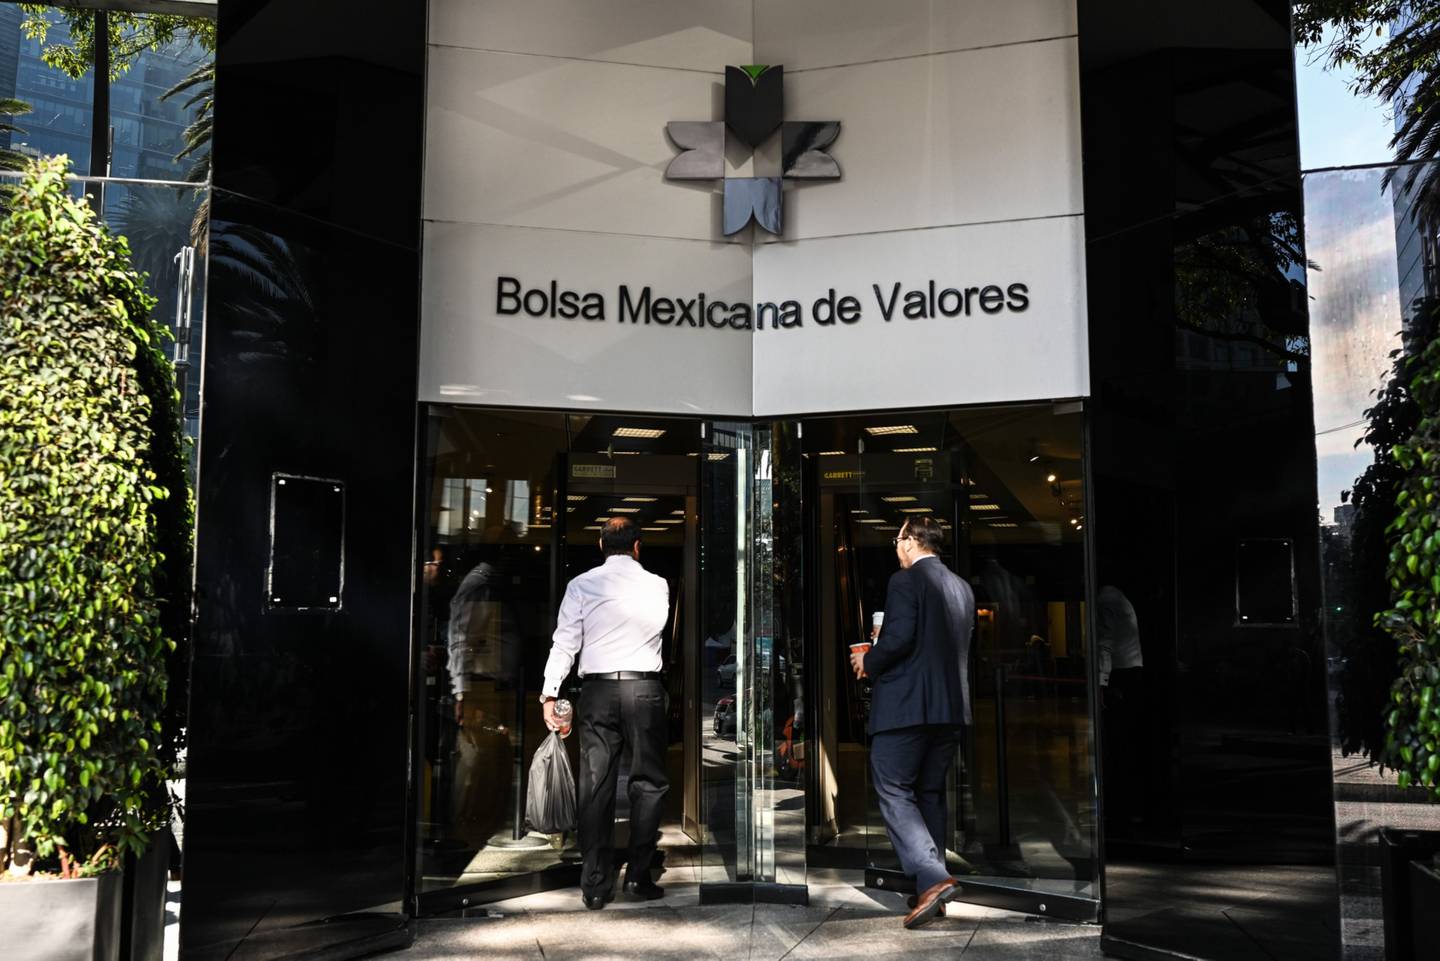 Mexico’s equity market has lagged behind those in Asia and regional peer Brazil in terms of new offerings and interest from foreign investors.